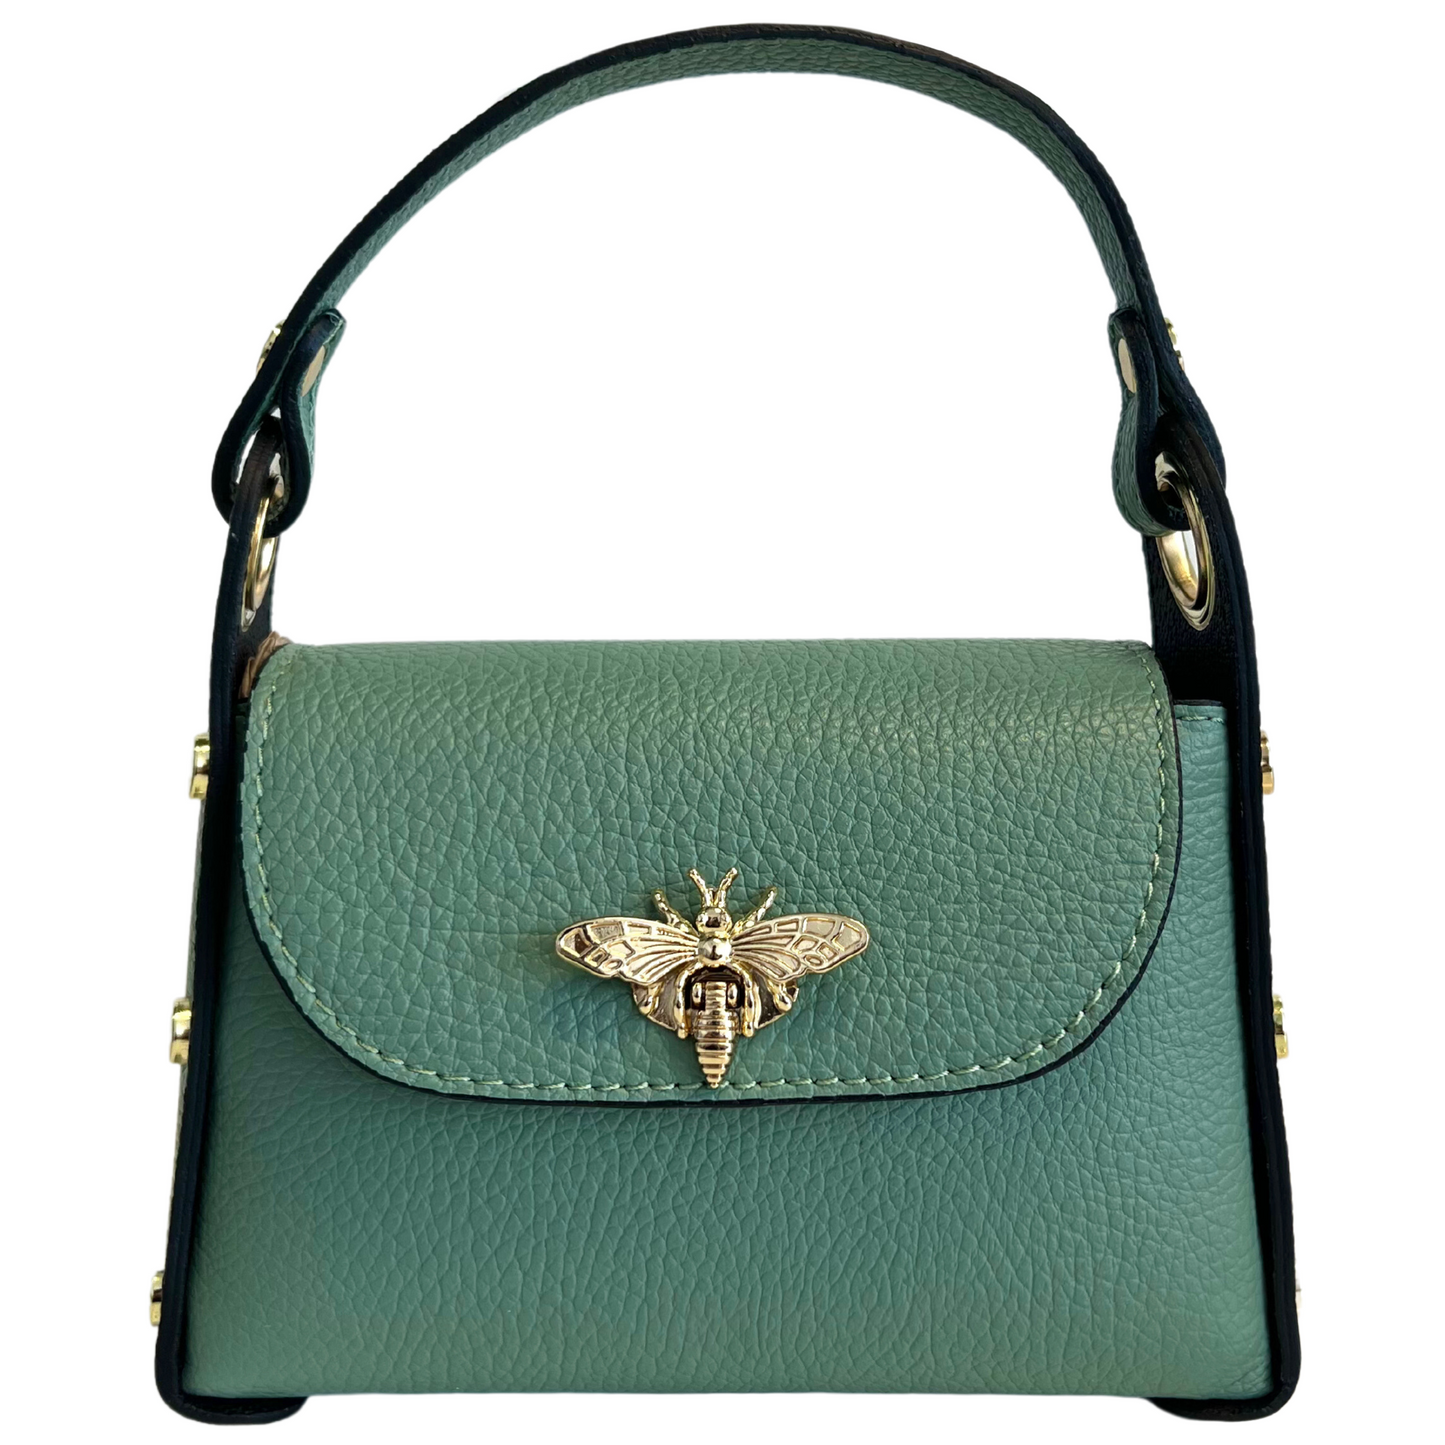 Modarno mini bag in genuine dollar leather with bee-shaped lobster clasp closure, side studs, removable metal chain, leather handle